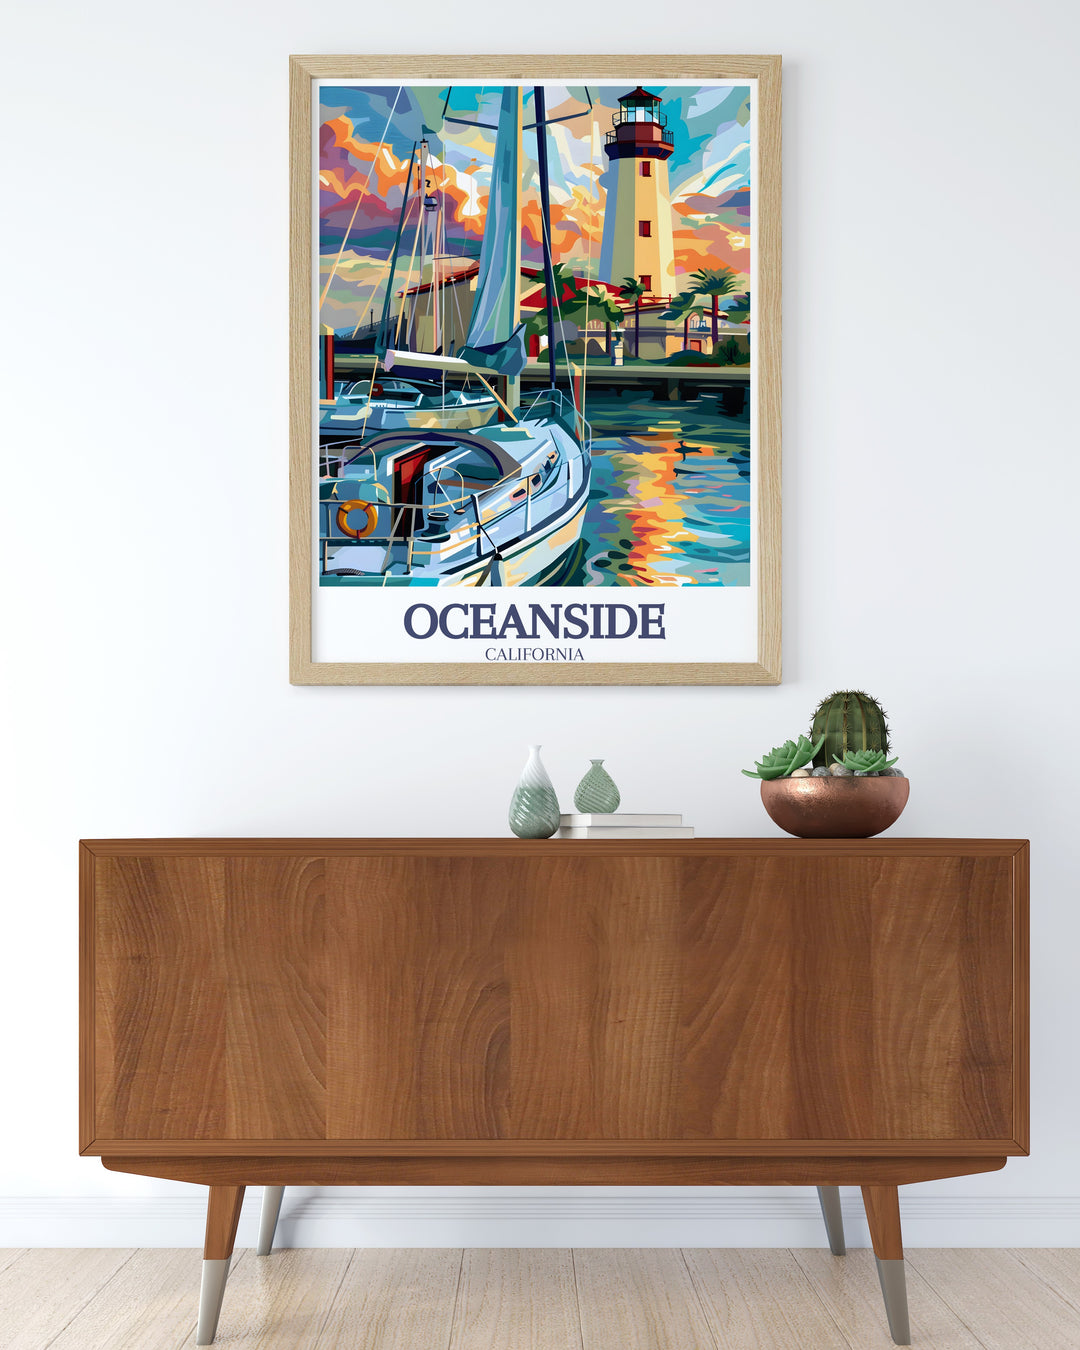 Stunning wall art of Oceanside Harbor Lighthouse capturing the serene beauty of Californias coast perfect for home decor or as a special gift for those who appreciate the beauty of beach scenes